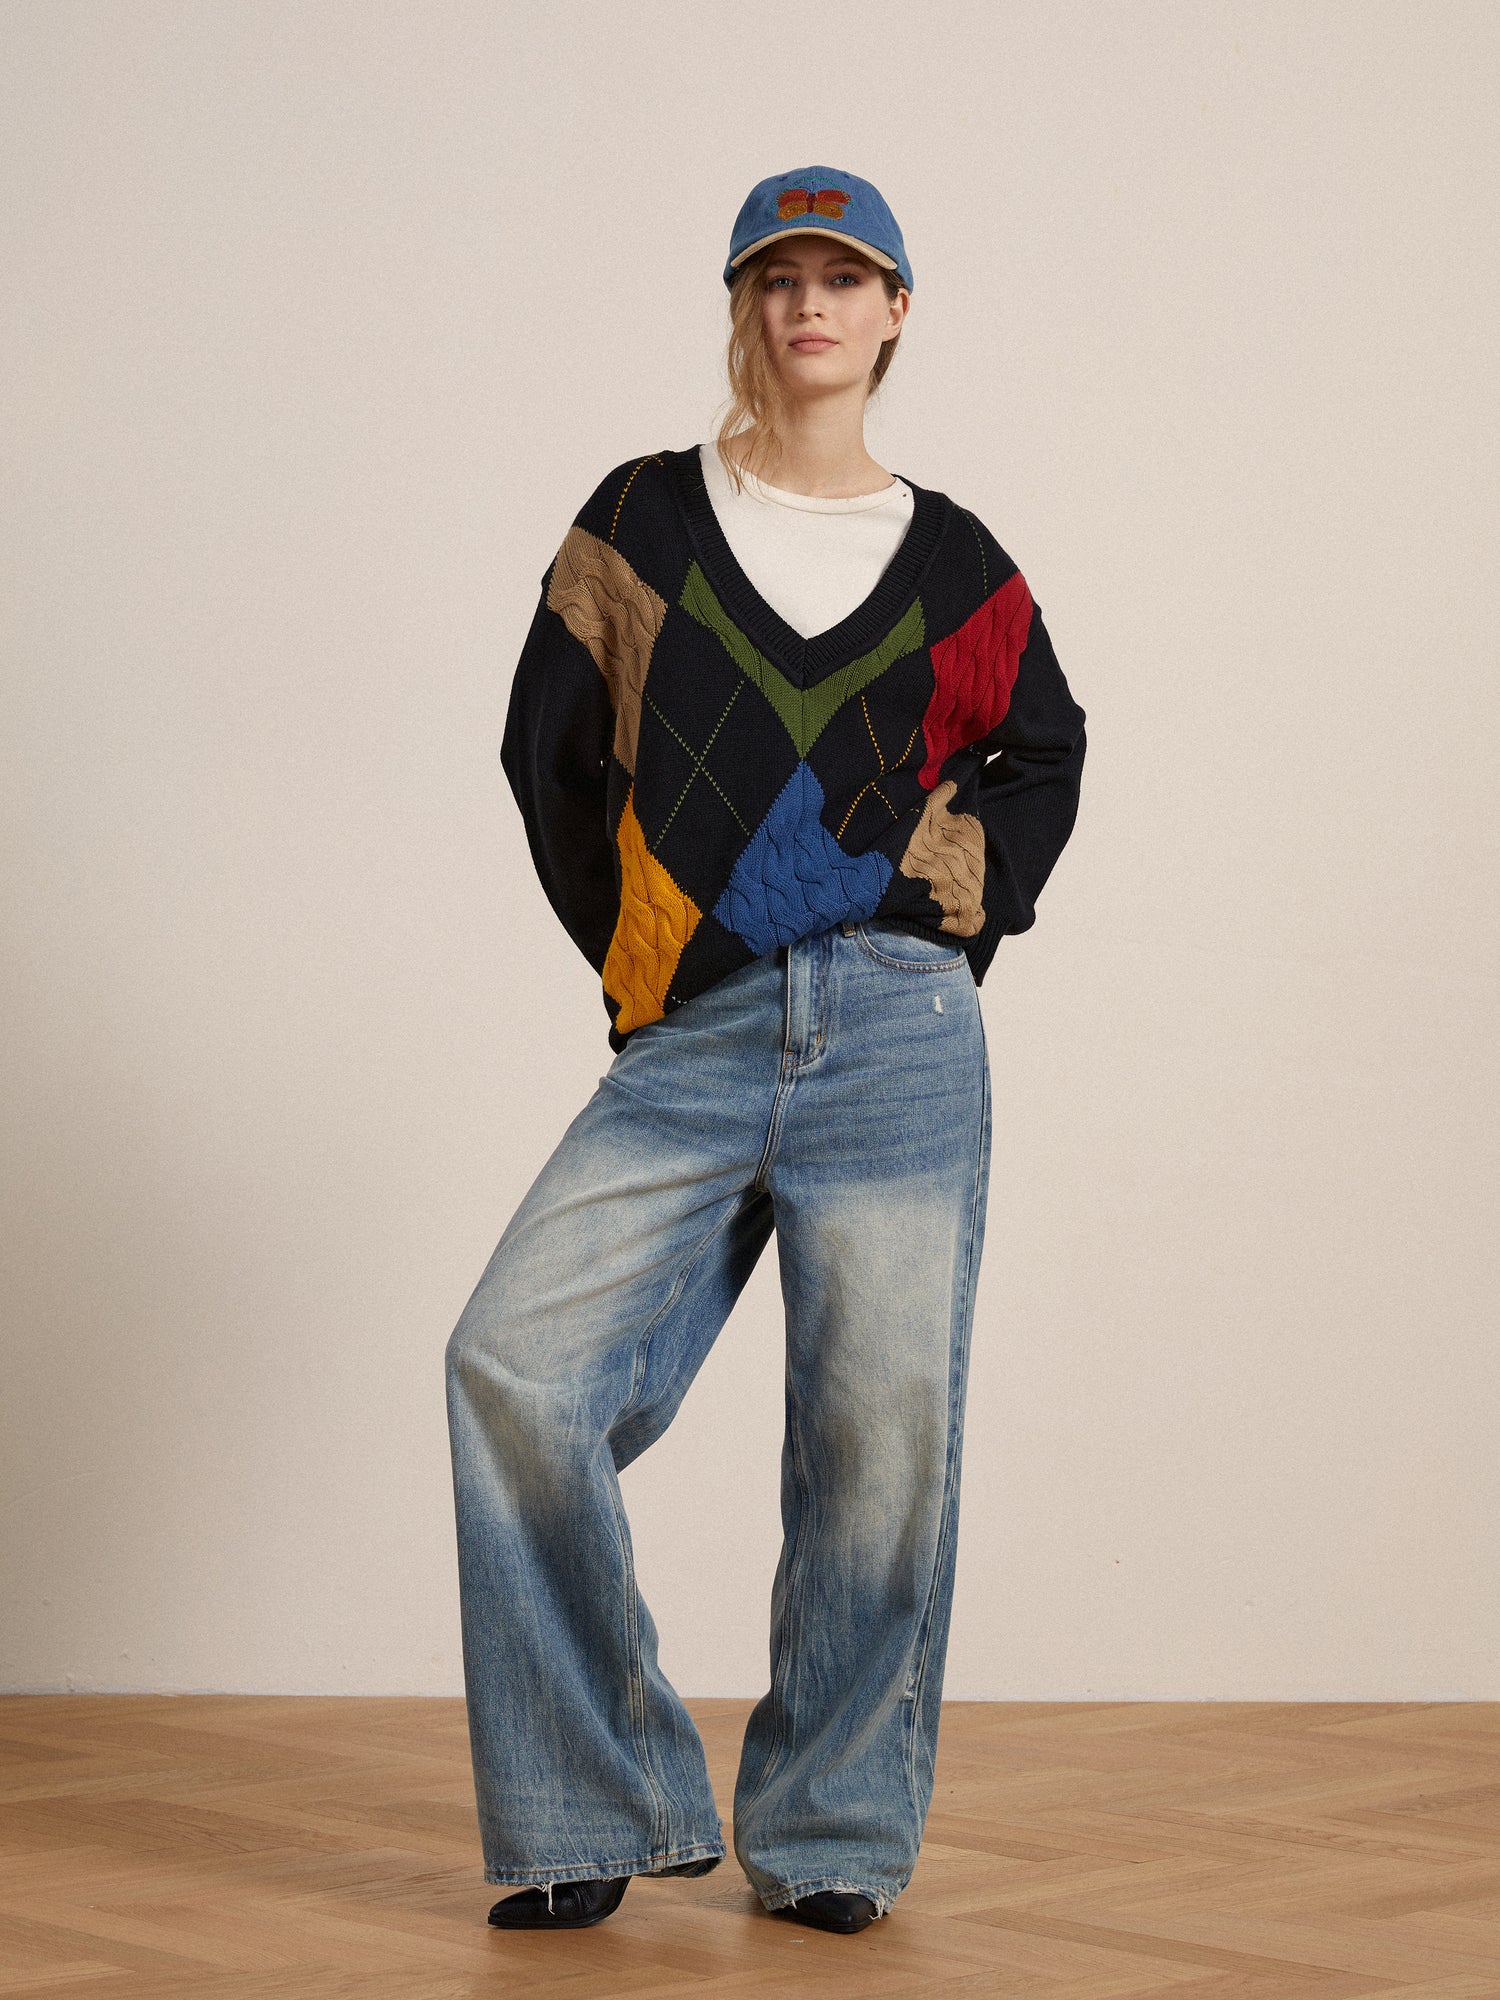 A woman wearing a Found Argyle Sweater and jeans.